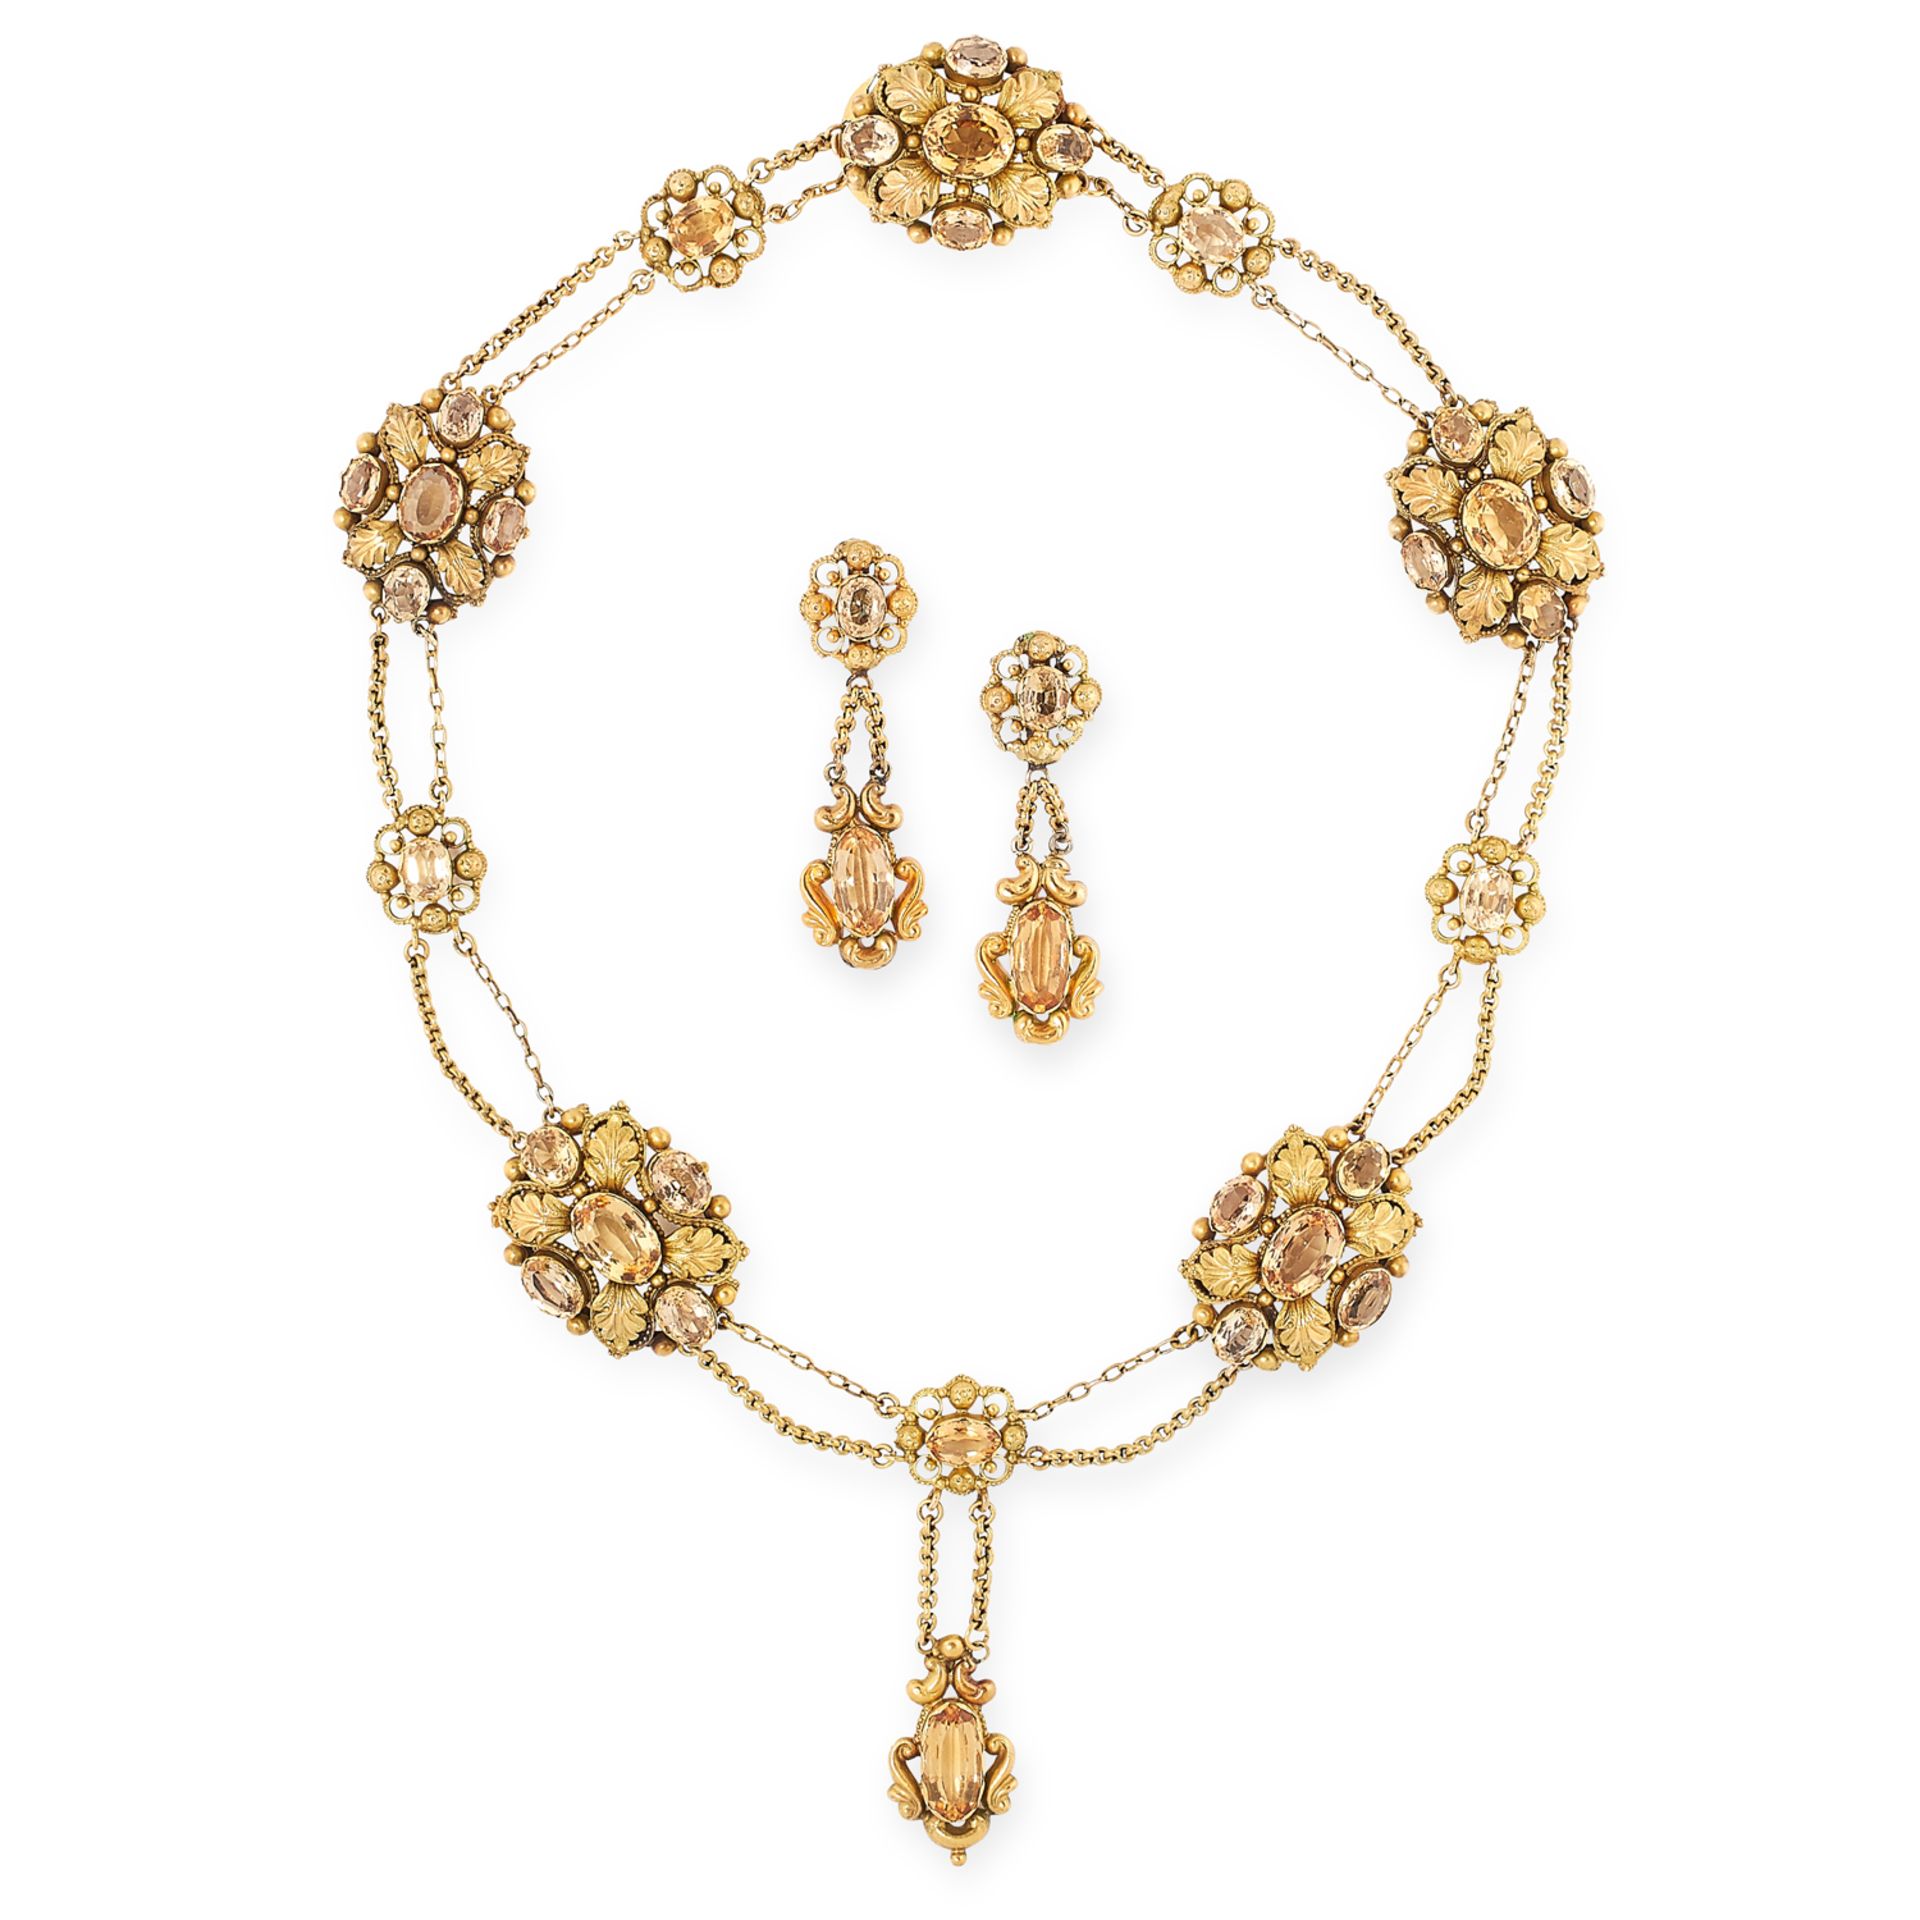 AN ANTIQUE IMPERIAL TOPAZ EARRING AND NECKLACE SUITE, 19TH CENTURY in yellow gold, each variously